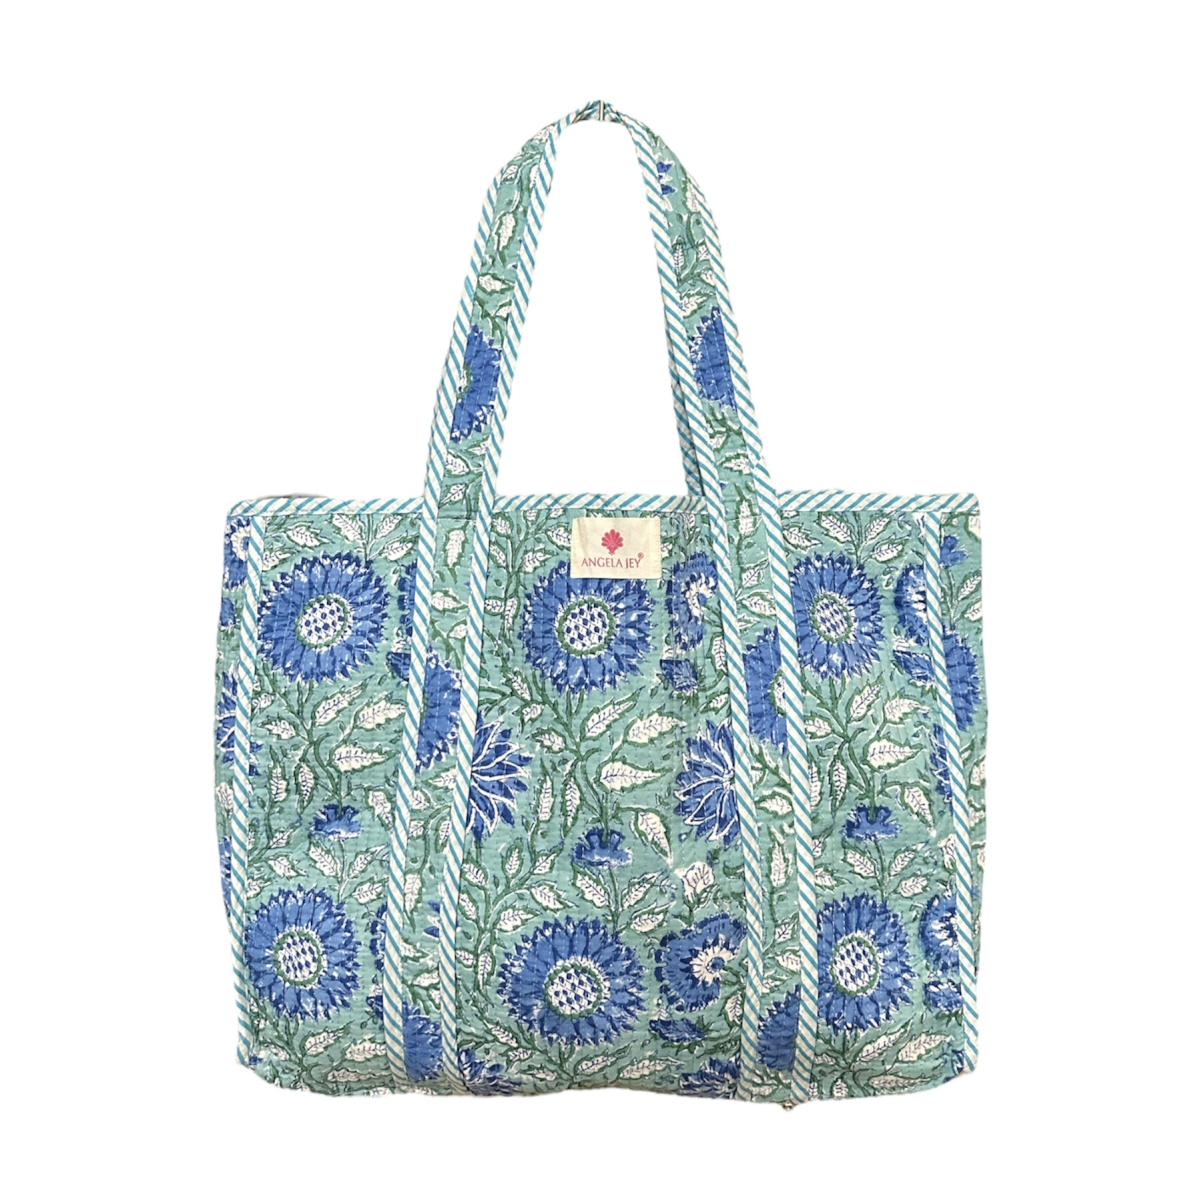 Block Printed Cotton Quilted Bag - Ocean Wave